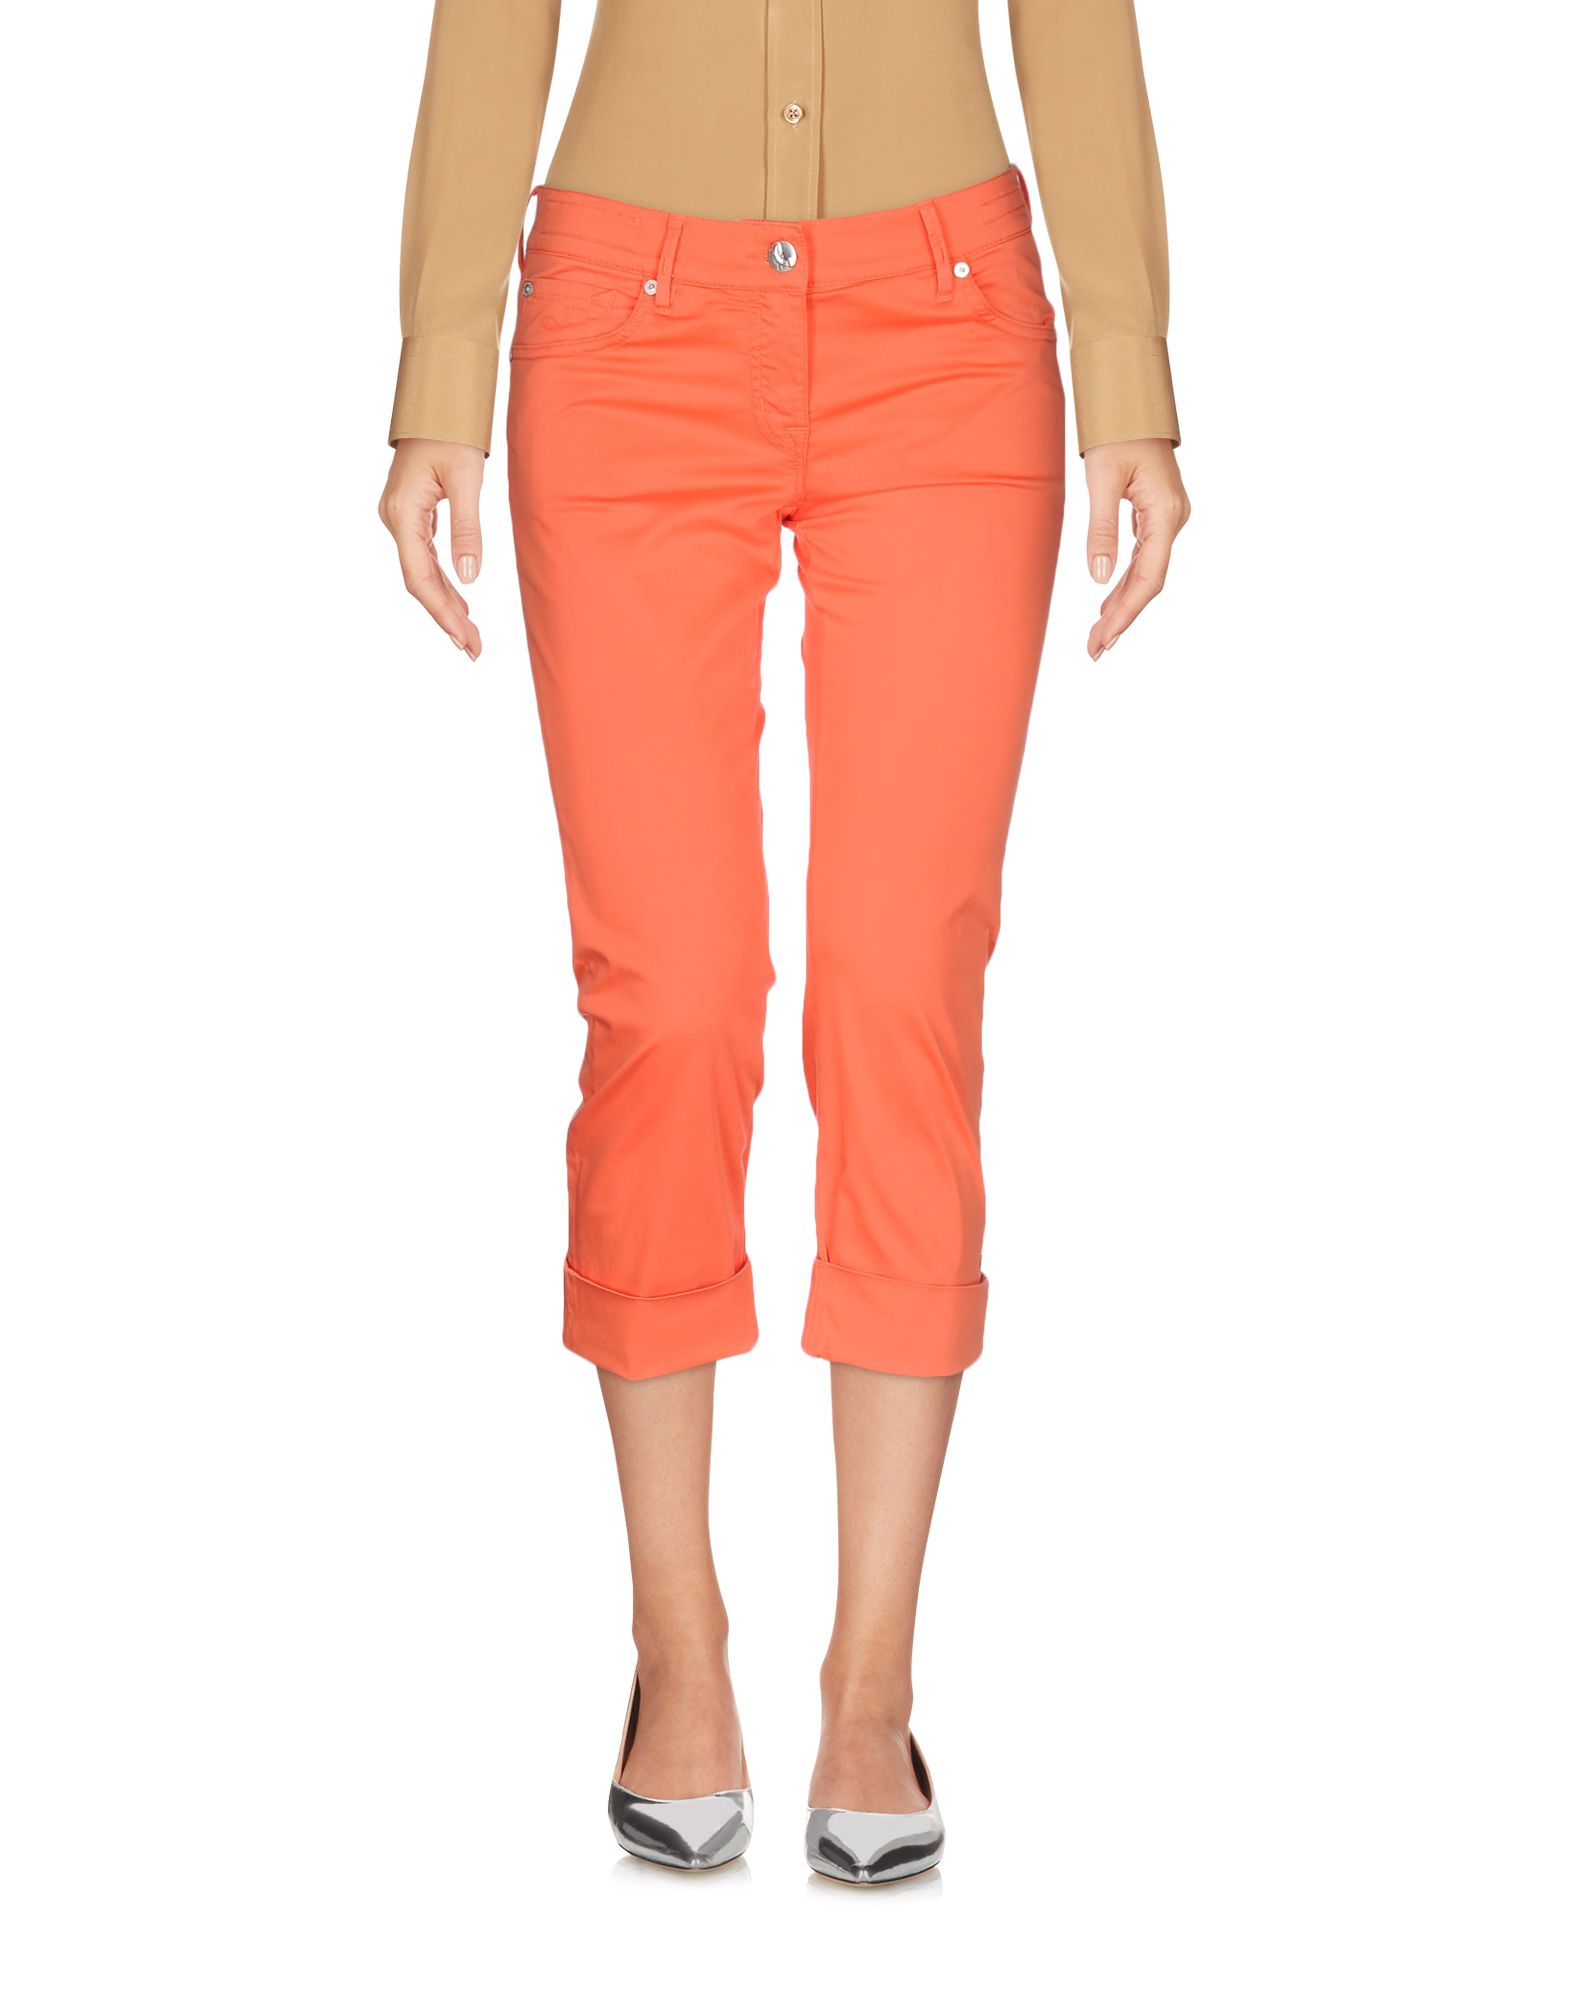 Jacob Cohёn Cropped Pants In Red